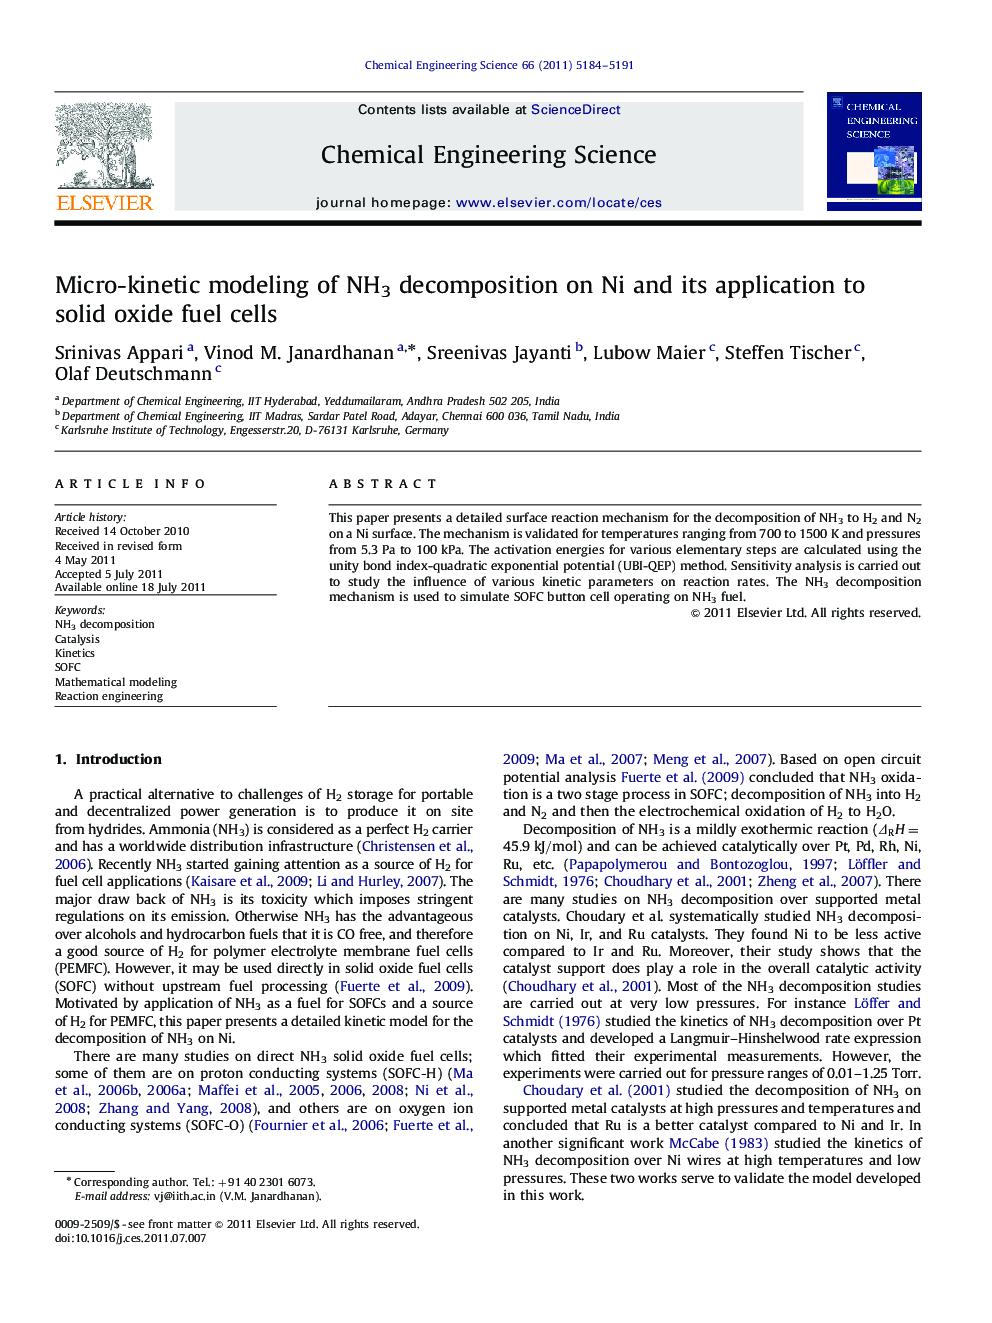 Micro-kinetic modeling of NH3 decomposition on Ni and its application to solid oxide fuel cells